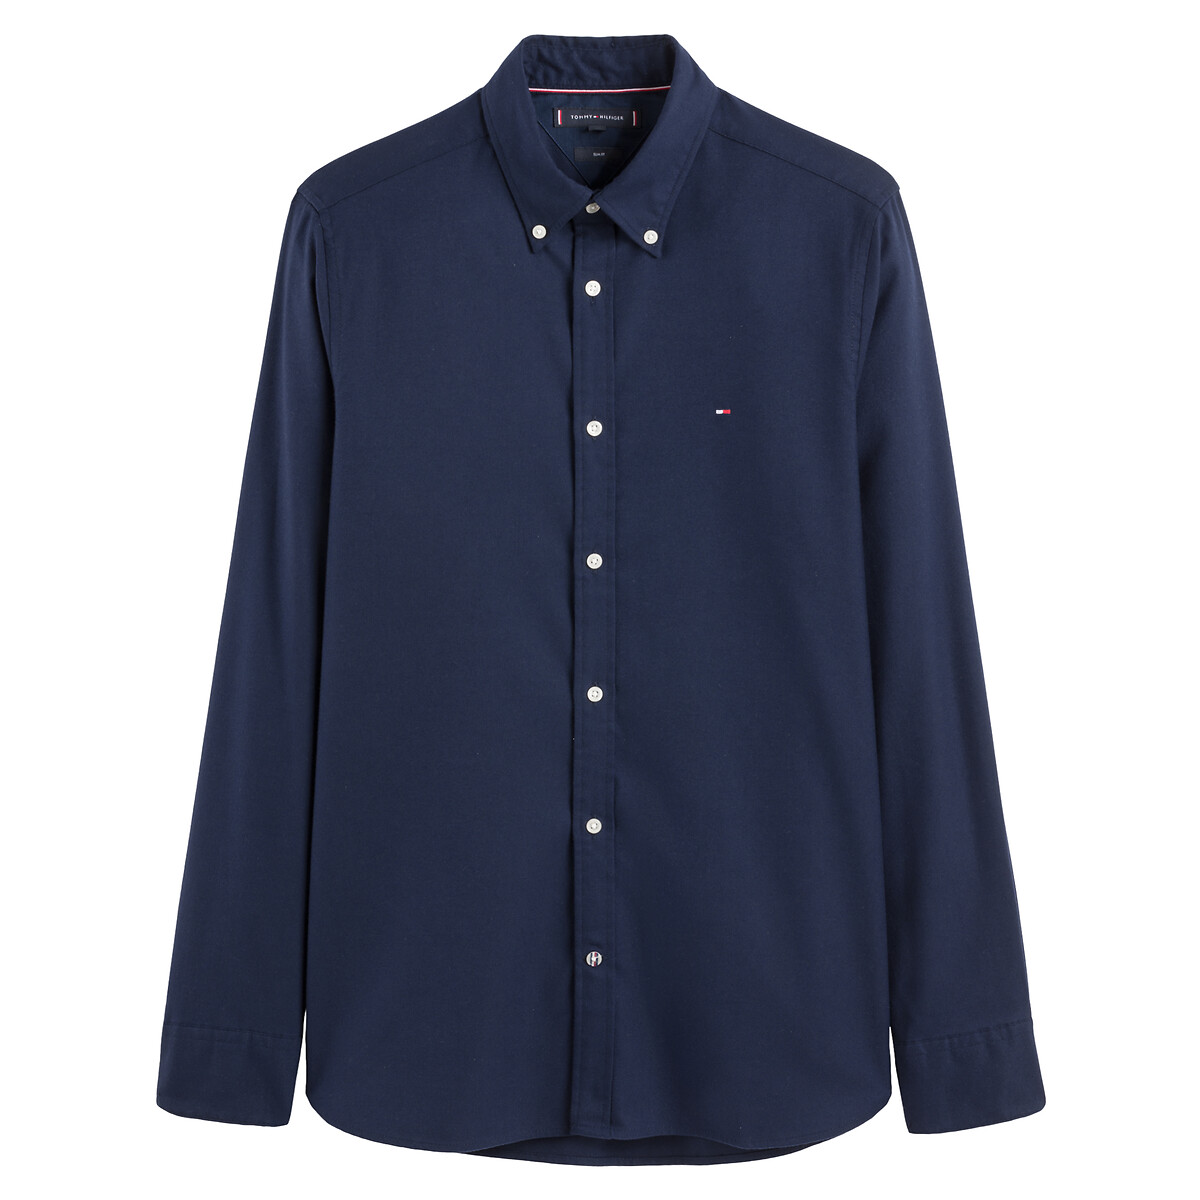 Image of Embroidered Logo Oxford Shirt in Soft Touch Cotton Mix